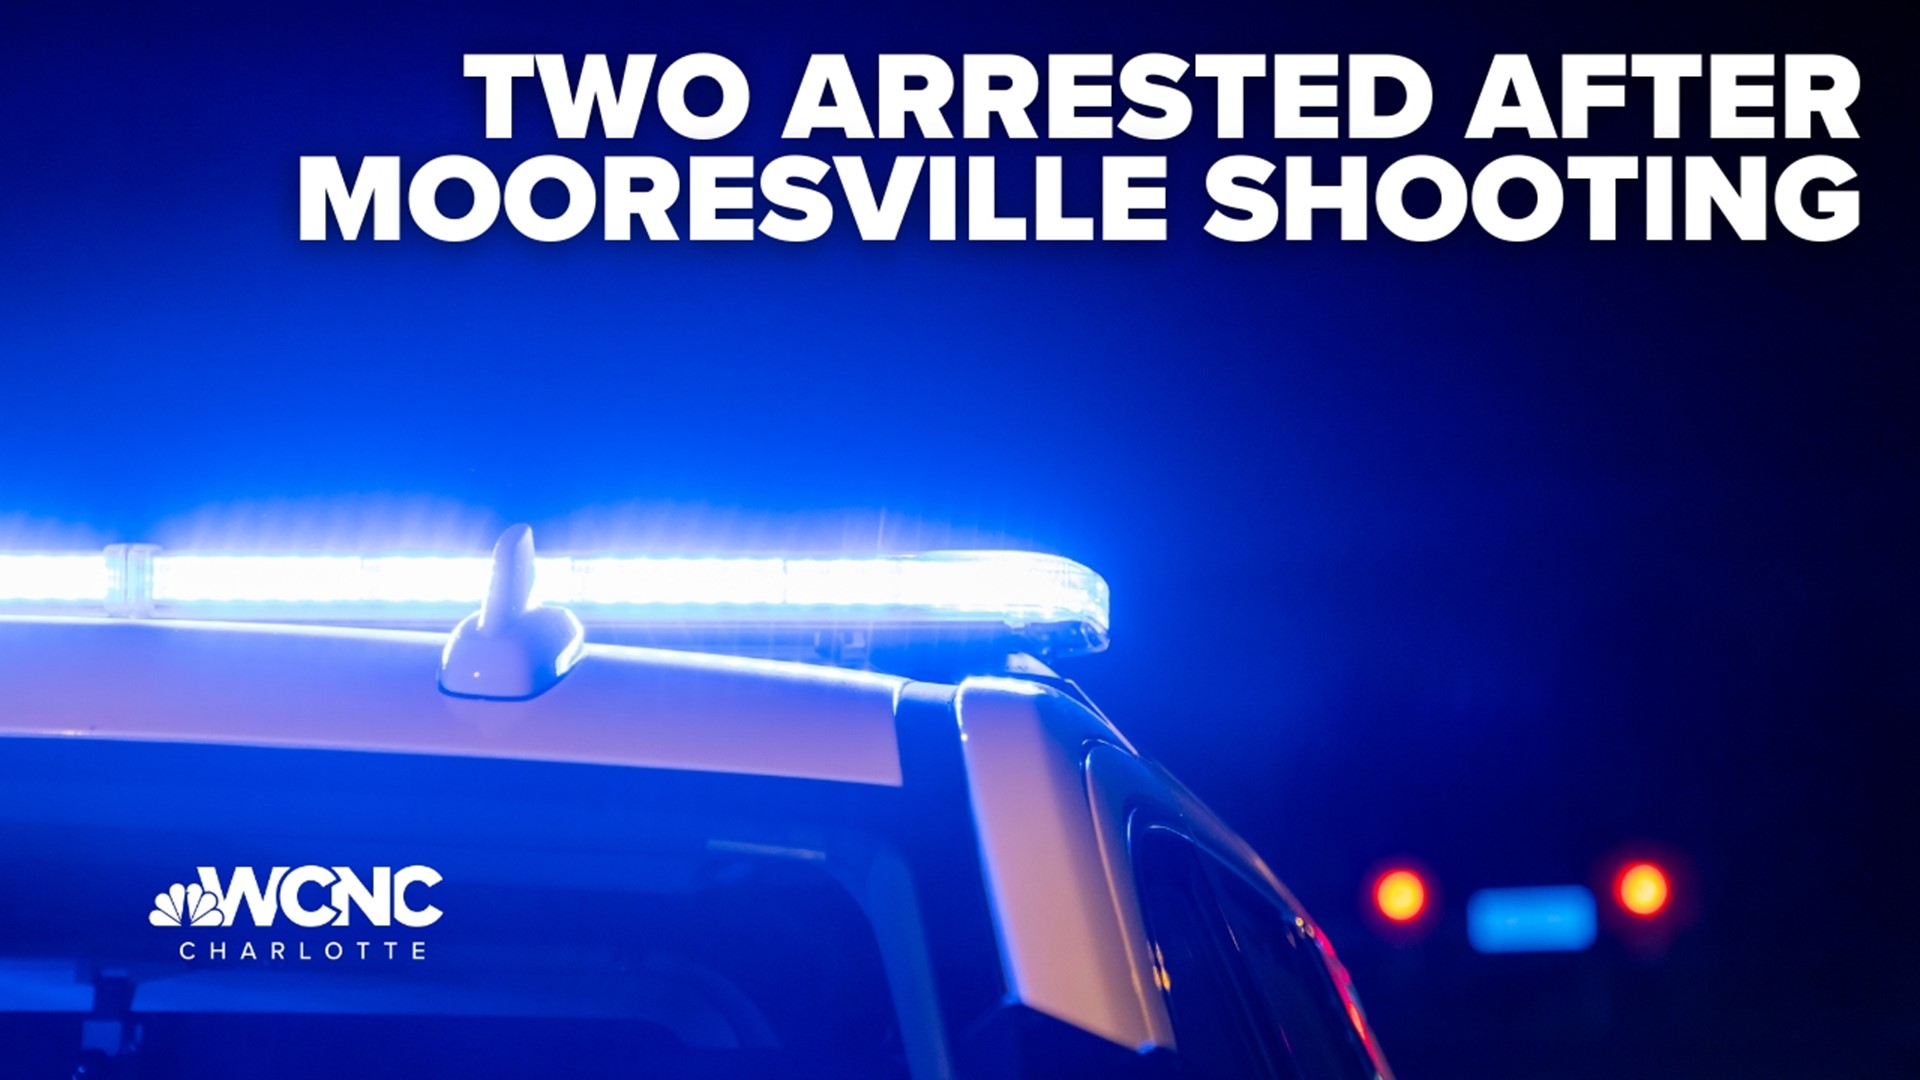 Police arrested two people after they say they shot someone in Mooresville.